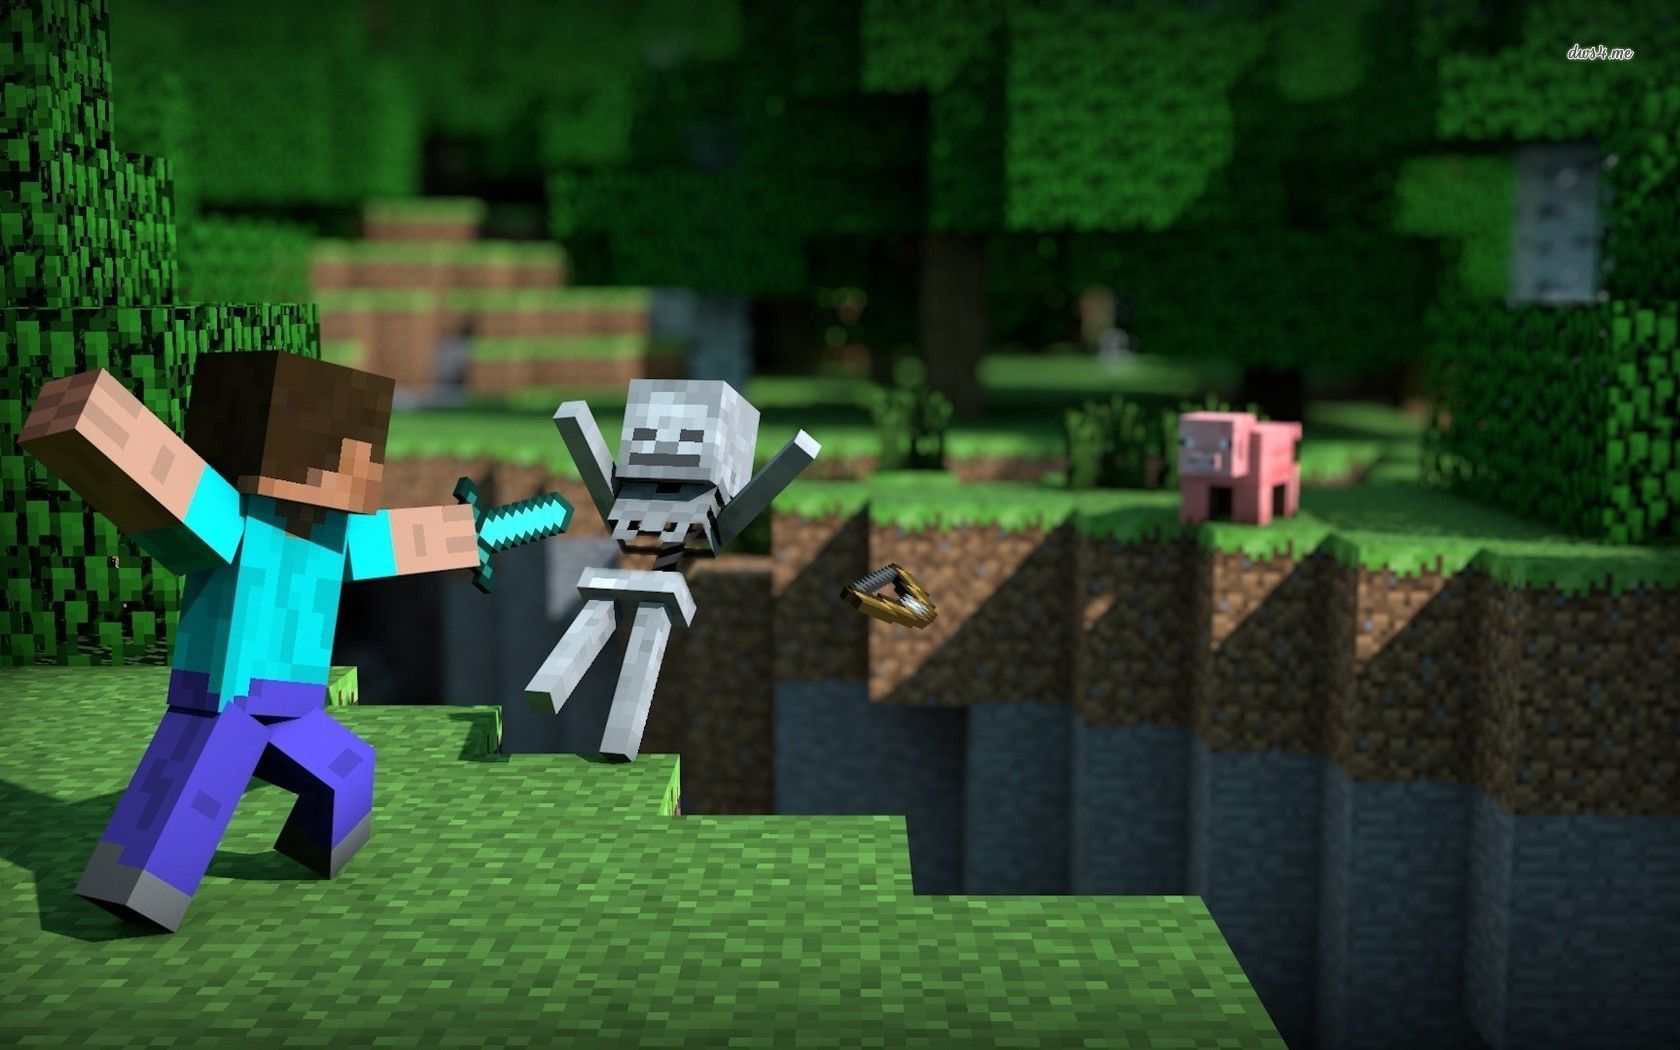 Minecraft wallpaper - Game wallpapers